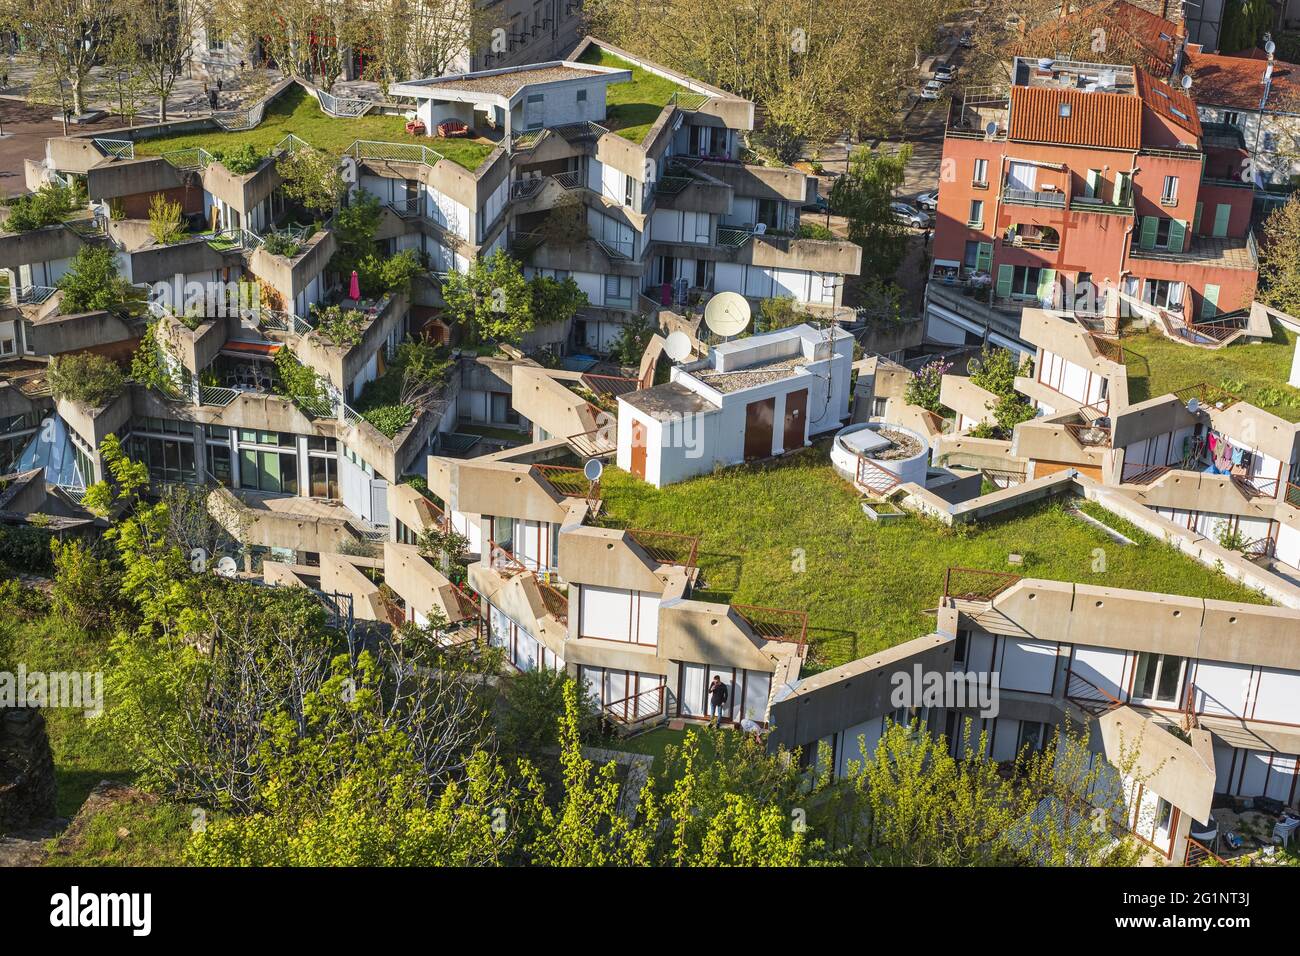 France, Rhone, Givors, Cit� des Etoiles, designed by the architect Jean  Renaudie, housing complex built between 1974 and 1981 and listed as a 20th  century architectural heritage Stock Photo - Alamy